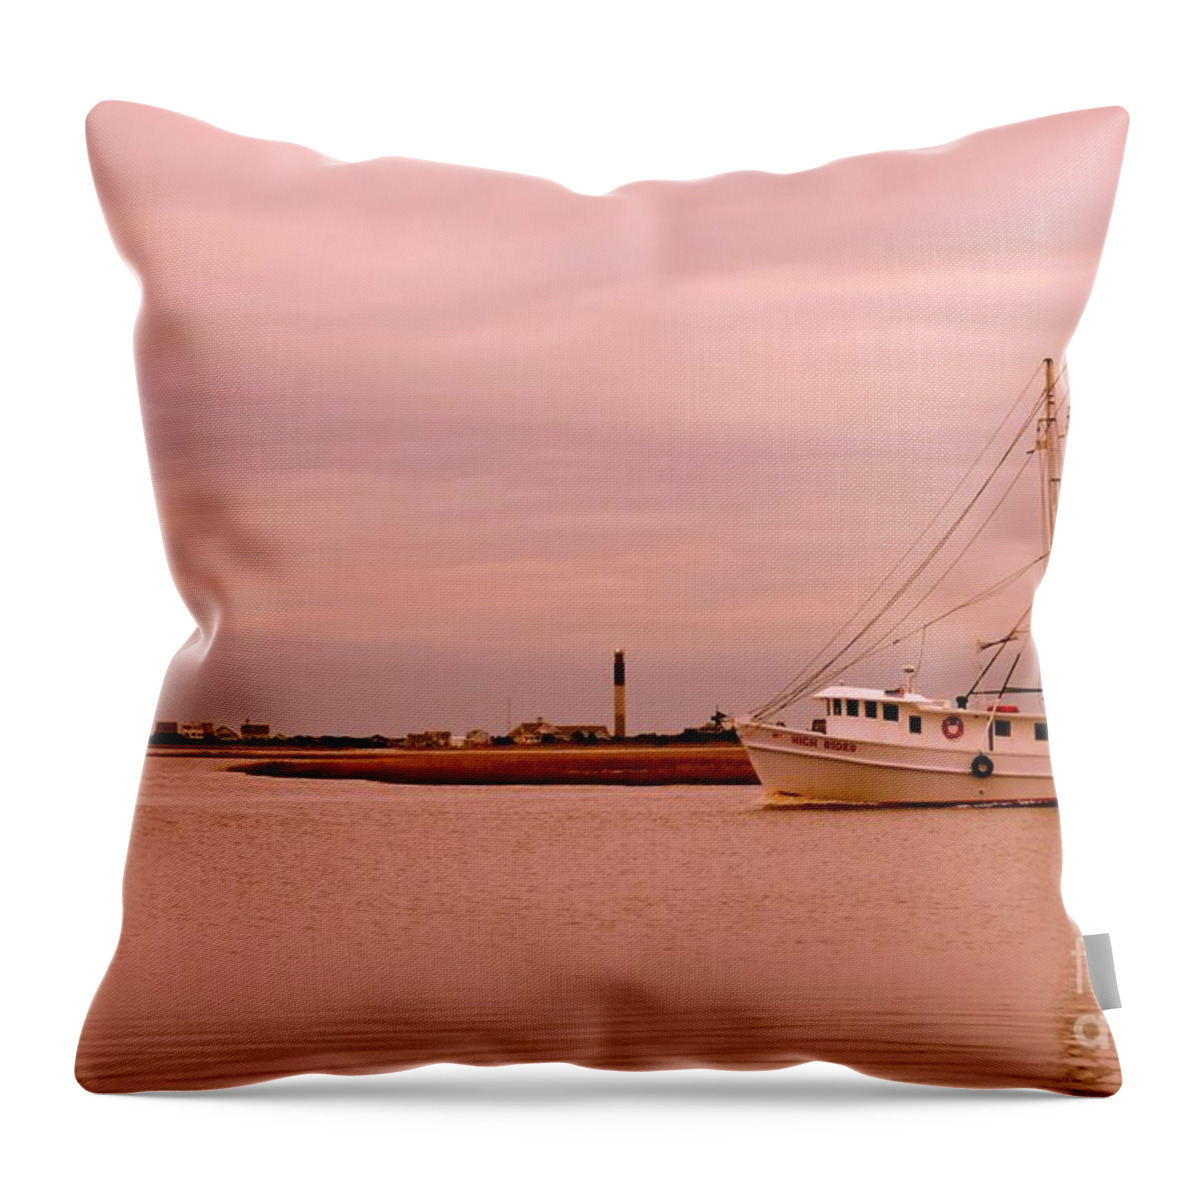 Art Throw Pillow featuring the photograph High Rider by Shelia Kempf